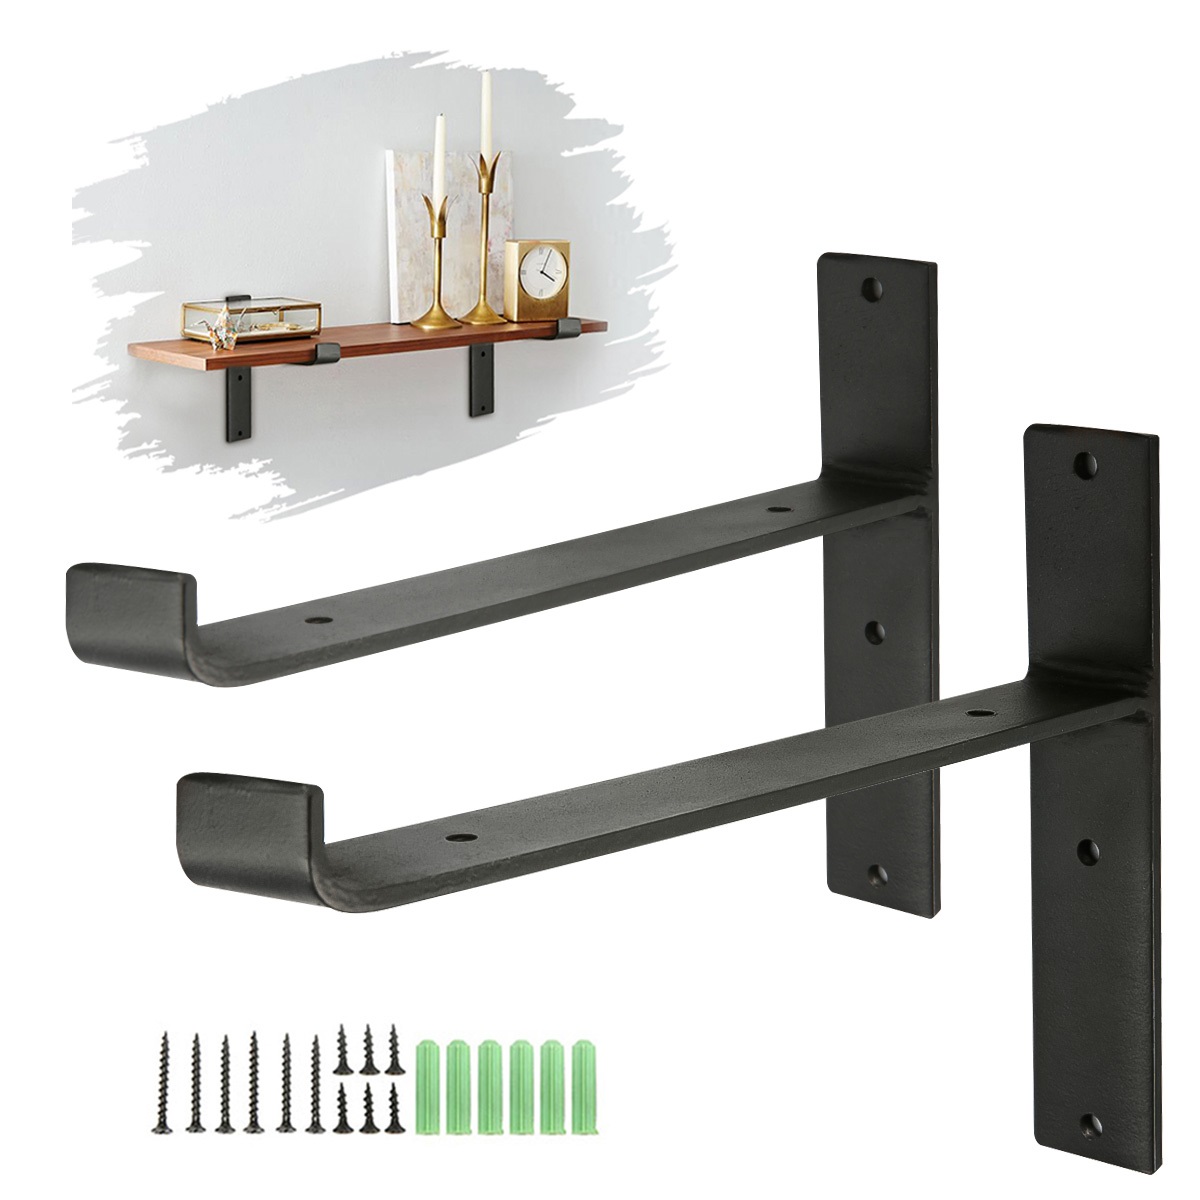 KING-DO-WAY-2Pcs-Industrial-Iron-Chunky-Solid-Wood-Shelf-Brackets-Matte-Black-Painting-for-Home-Shop-1212500-8